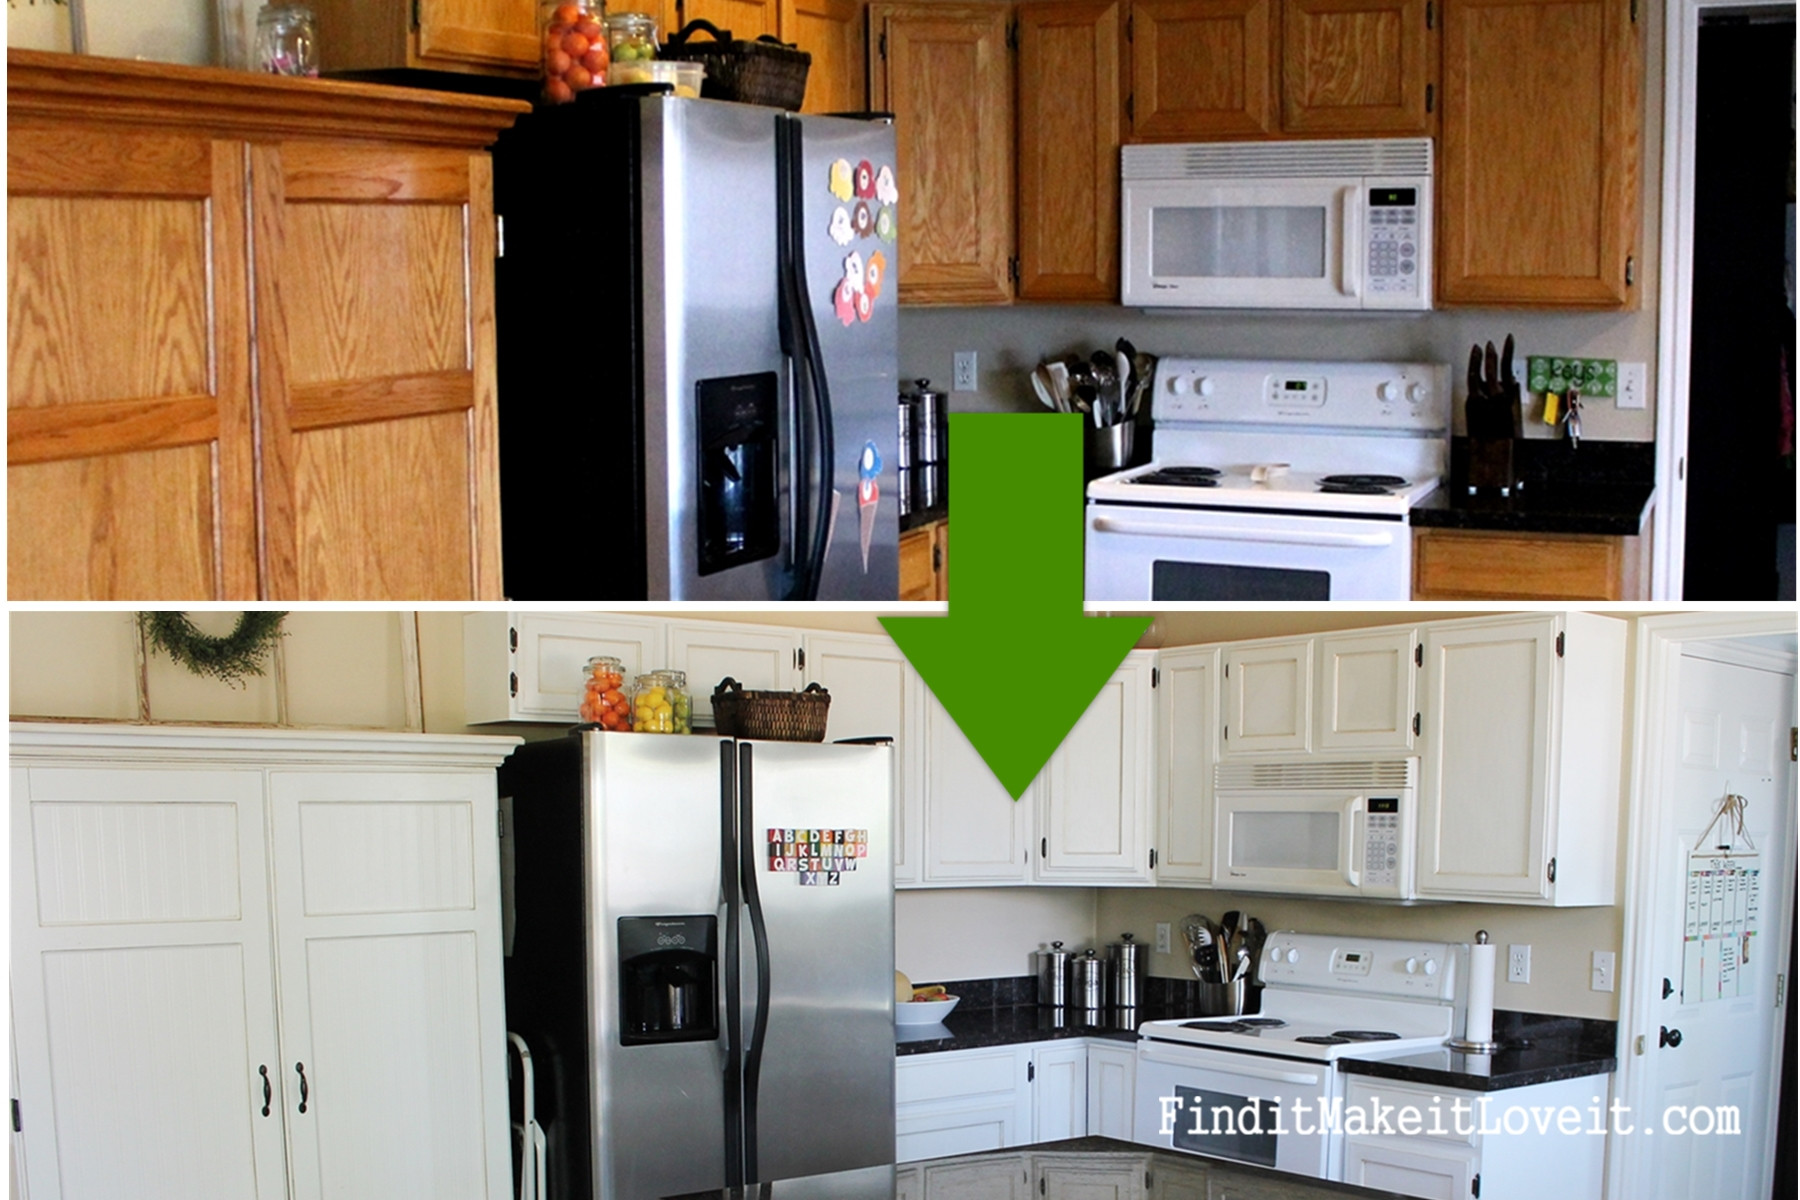 Best ideas about DIY Repaint Kitchen Cabinets
. Save or Pin $150 Kitchen Cabinet Makeover Find it Make it Love it Now.